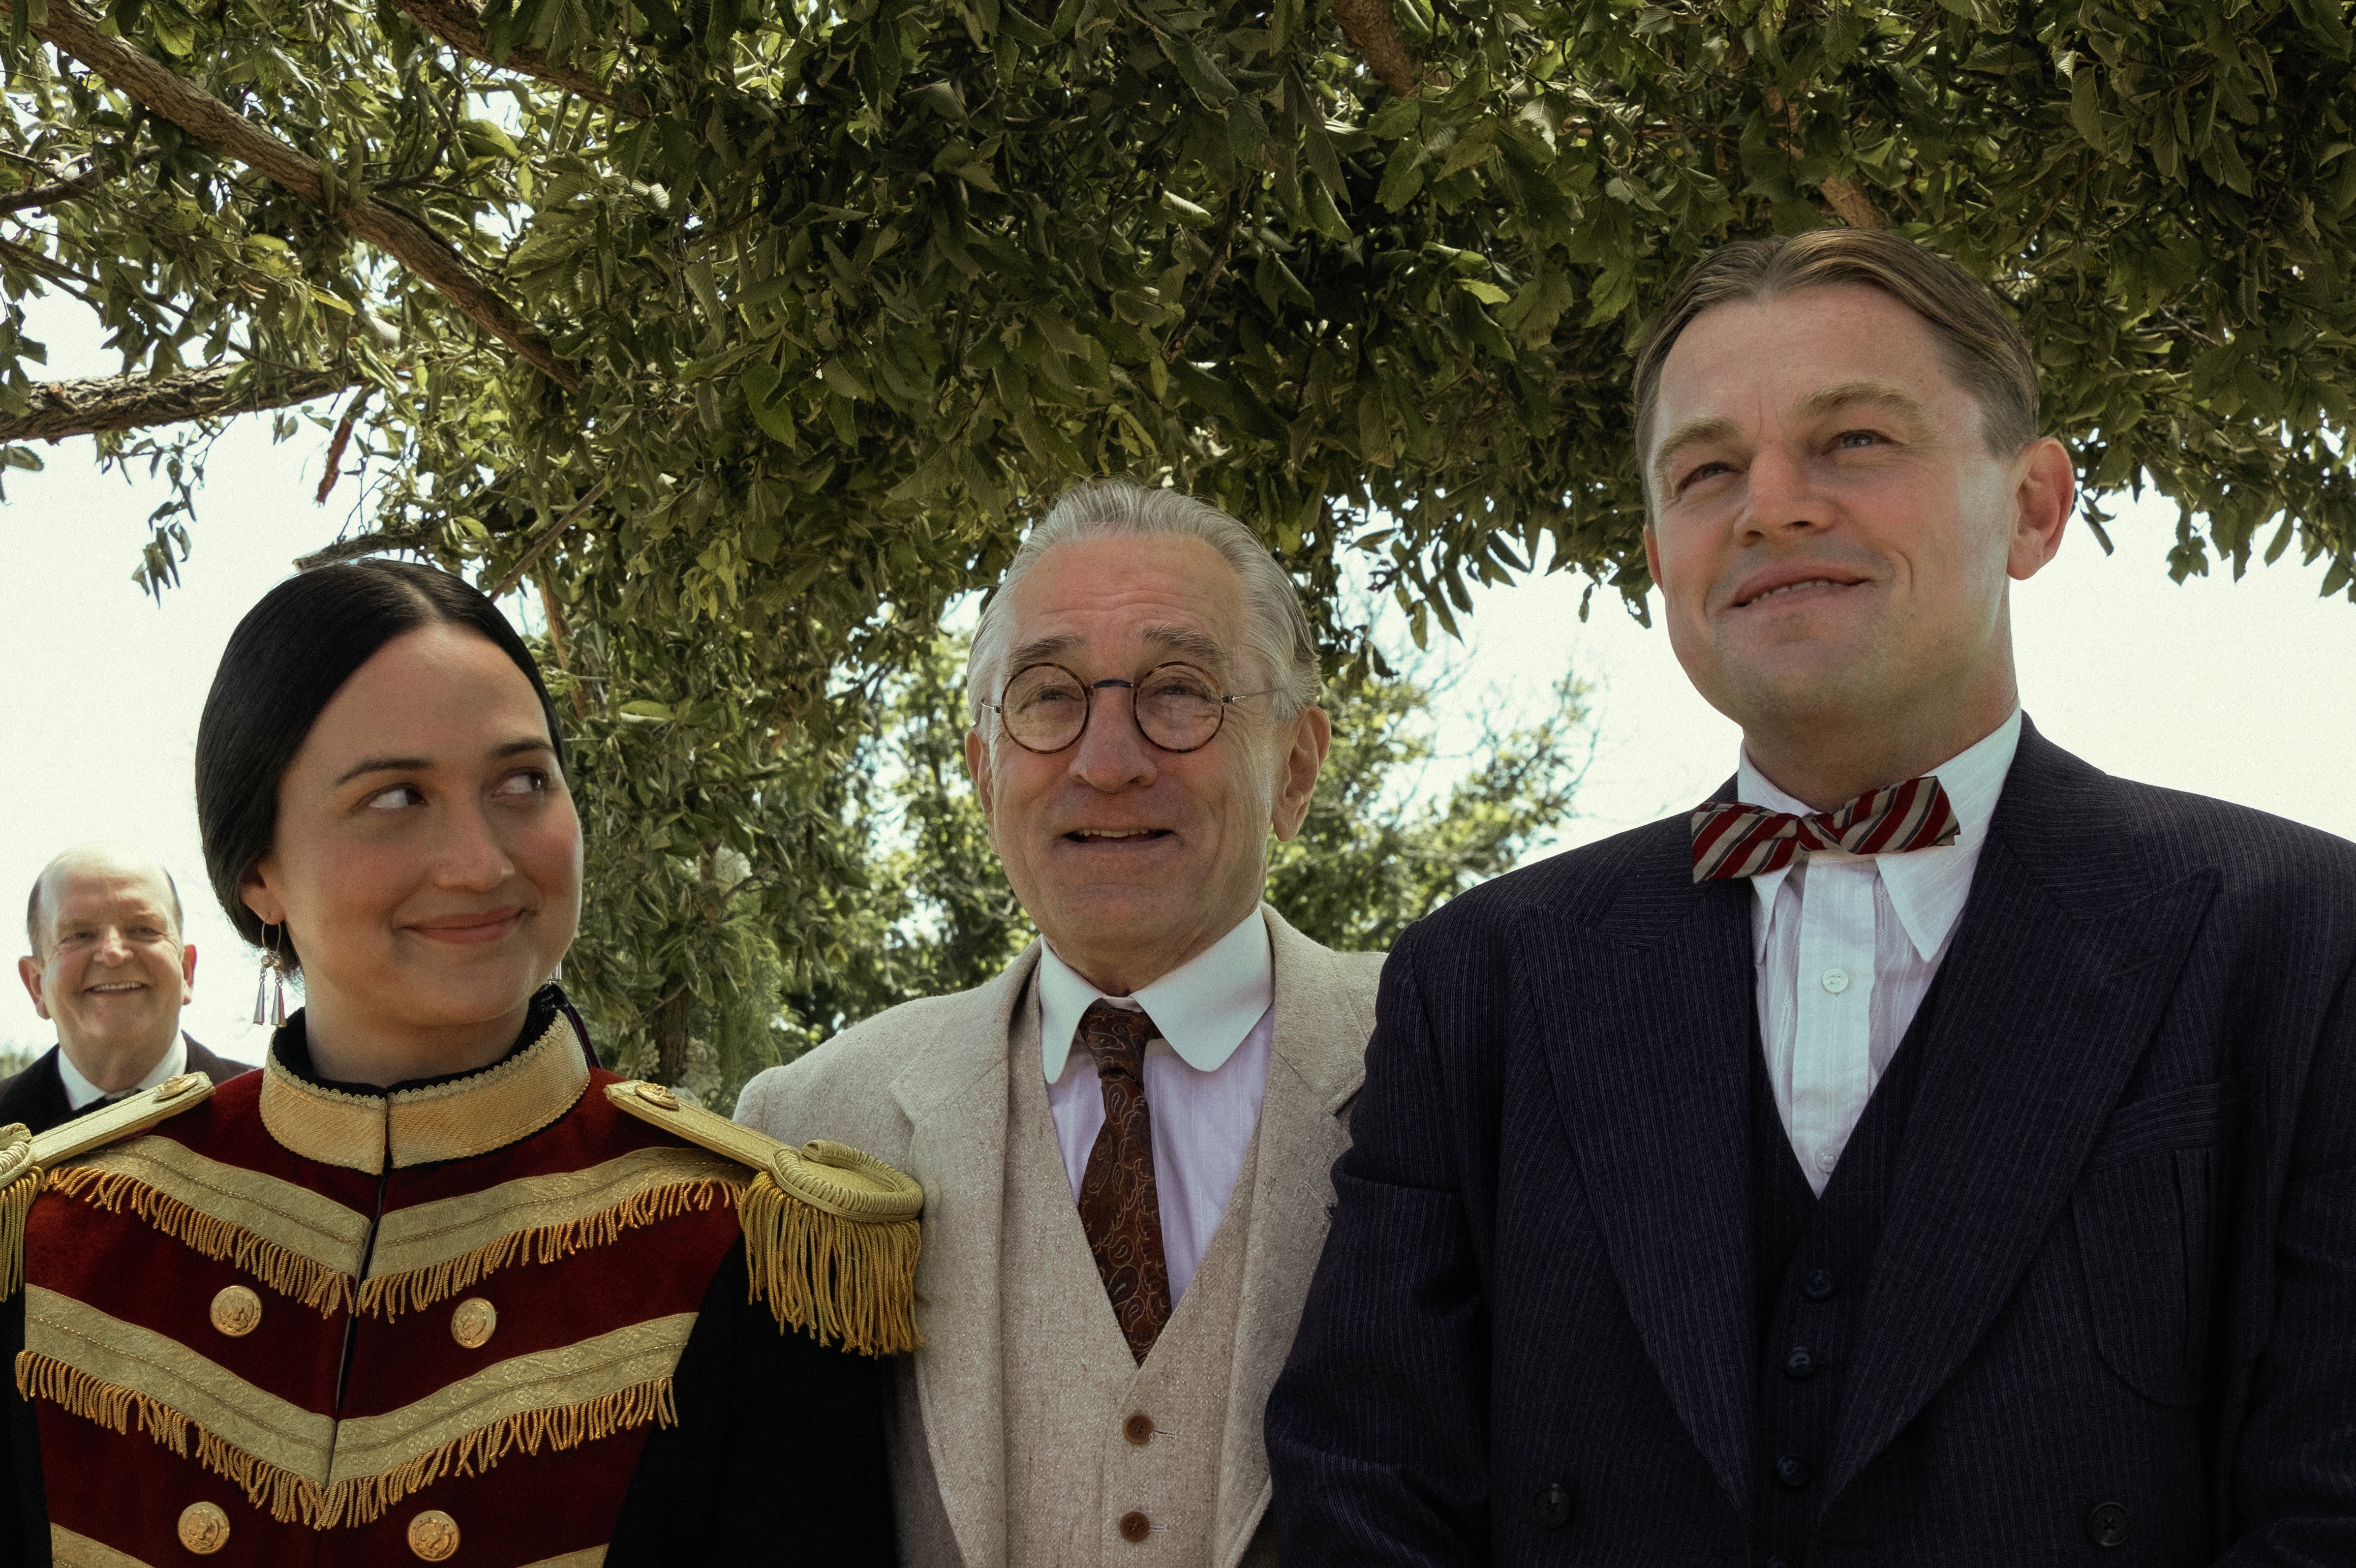 (From left) Lily Gladstone, Robert De Niro and Leonardo DiCaprio in ‘Killers of the Flower Moon’